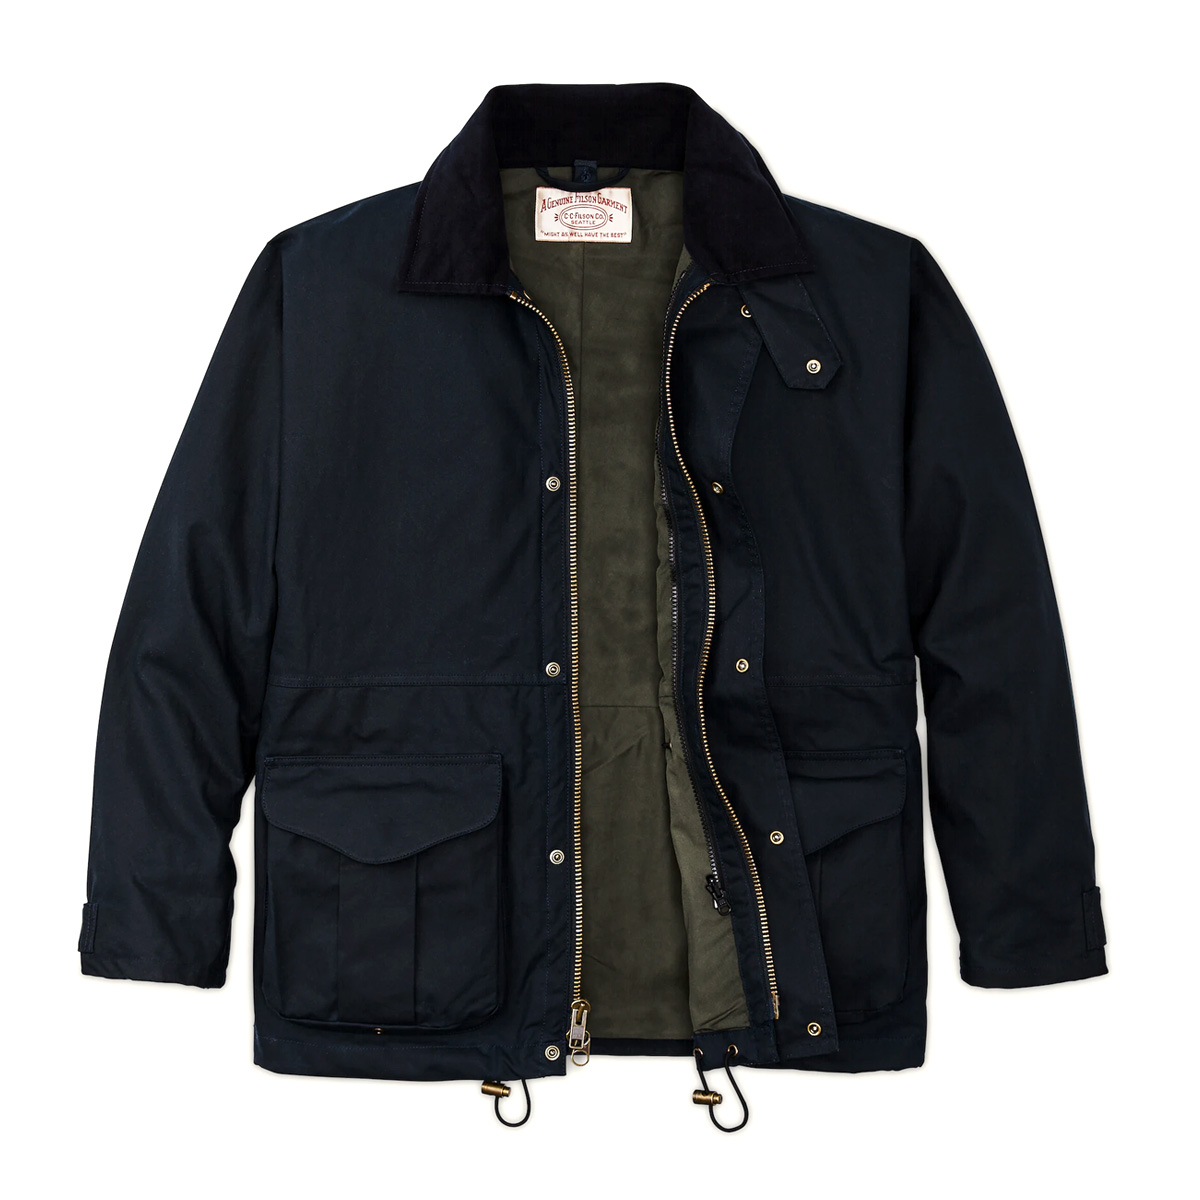 Filson Foul Weather Jacket Harbor Blue, a classic waxed-cotton raincoat with improved fit and sturdy fabric